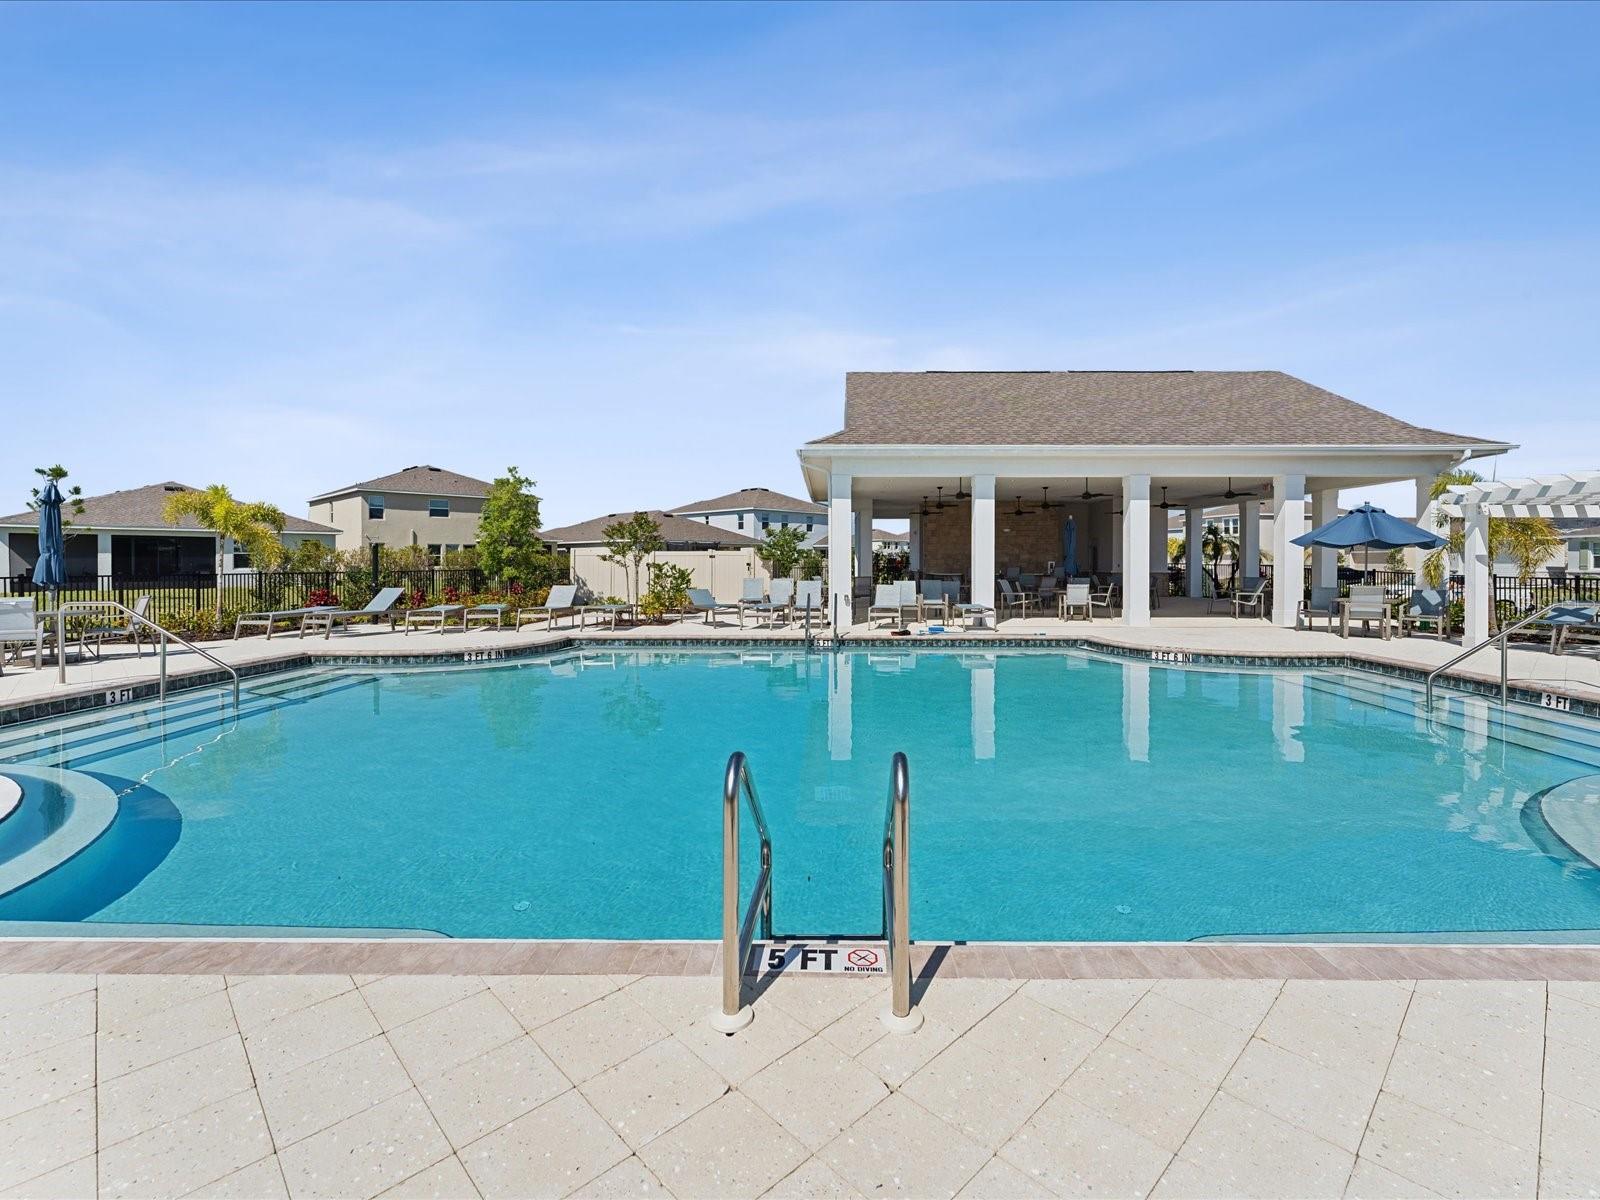 Swim all day in the sparkling pool or take a break in the shade of the cool patio.